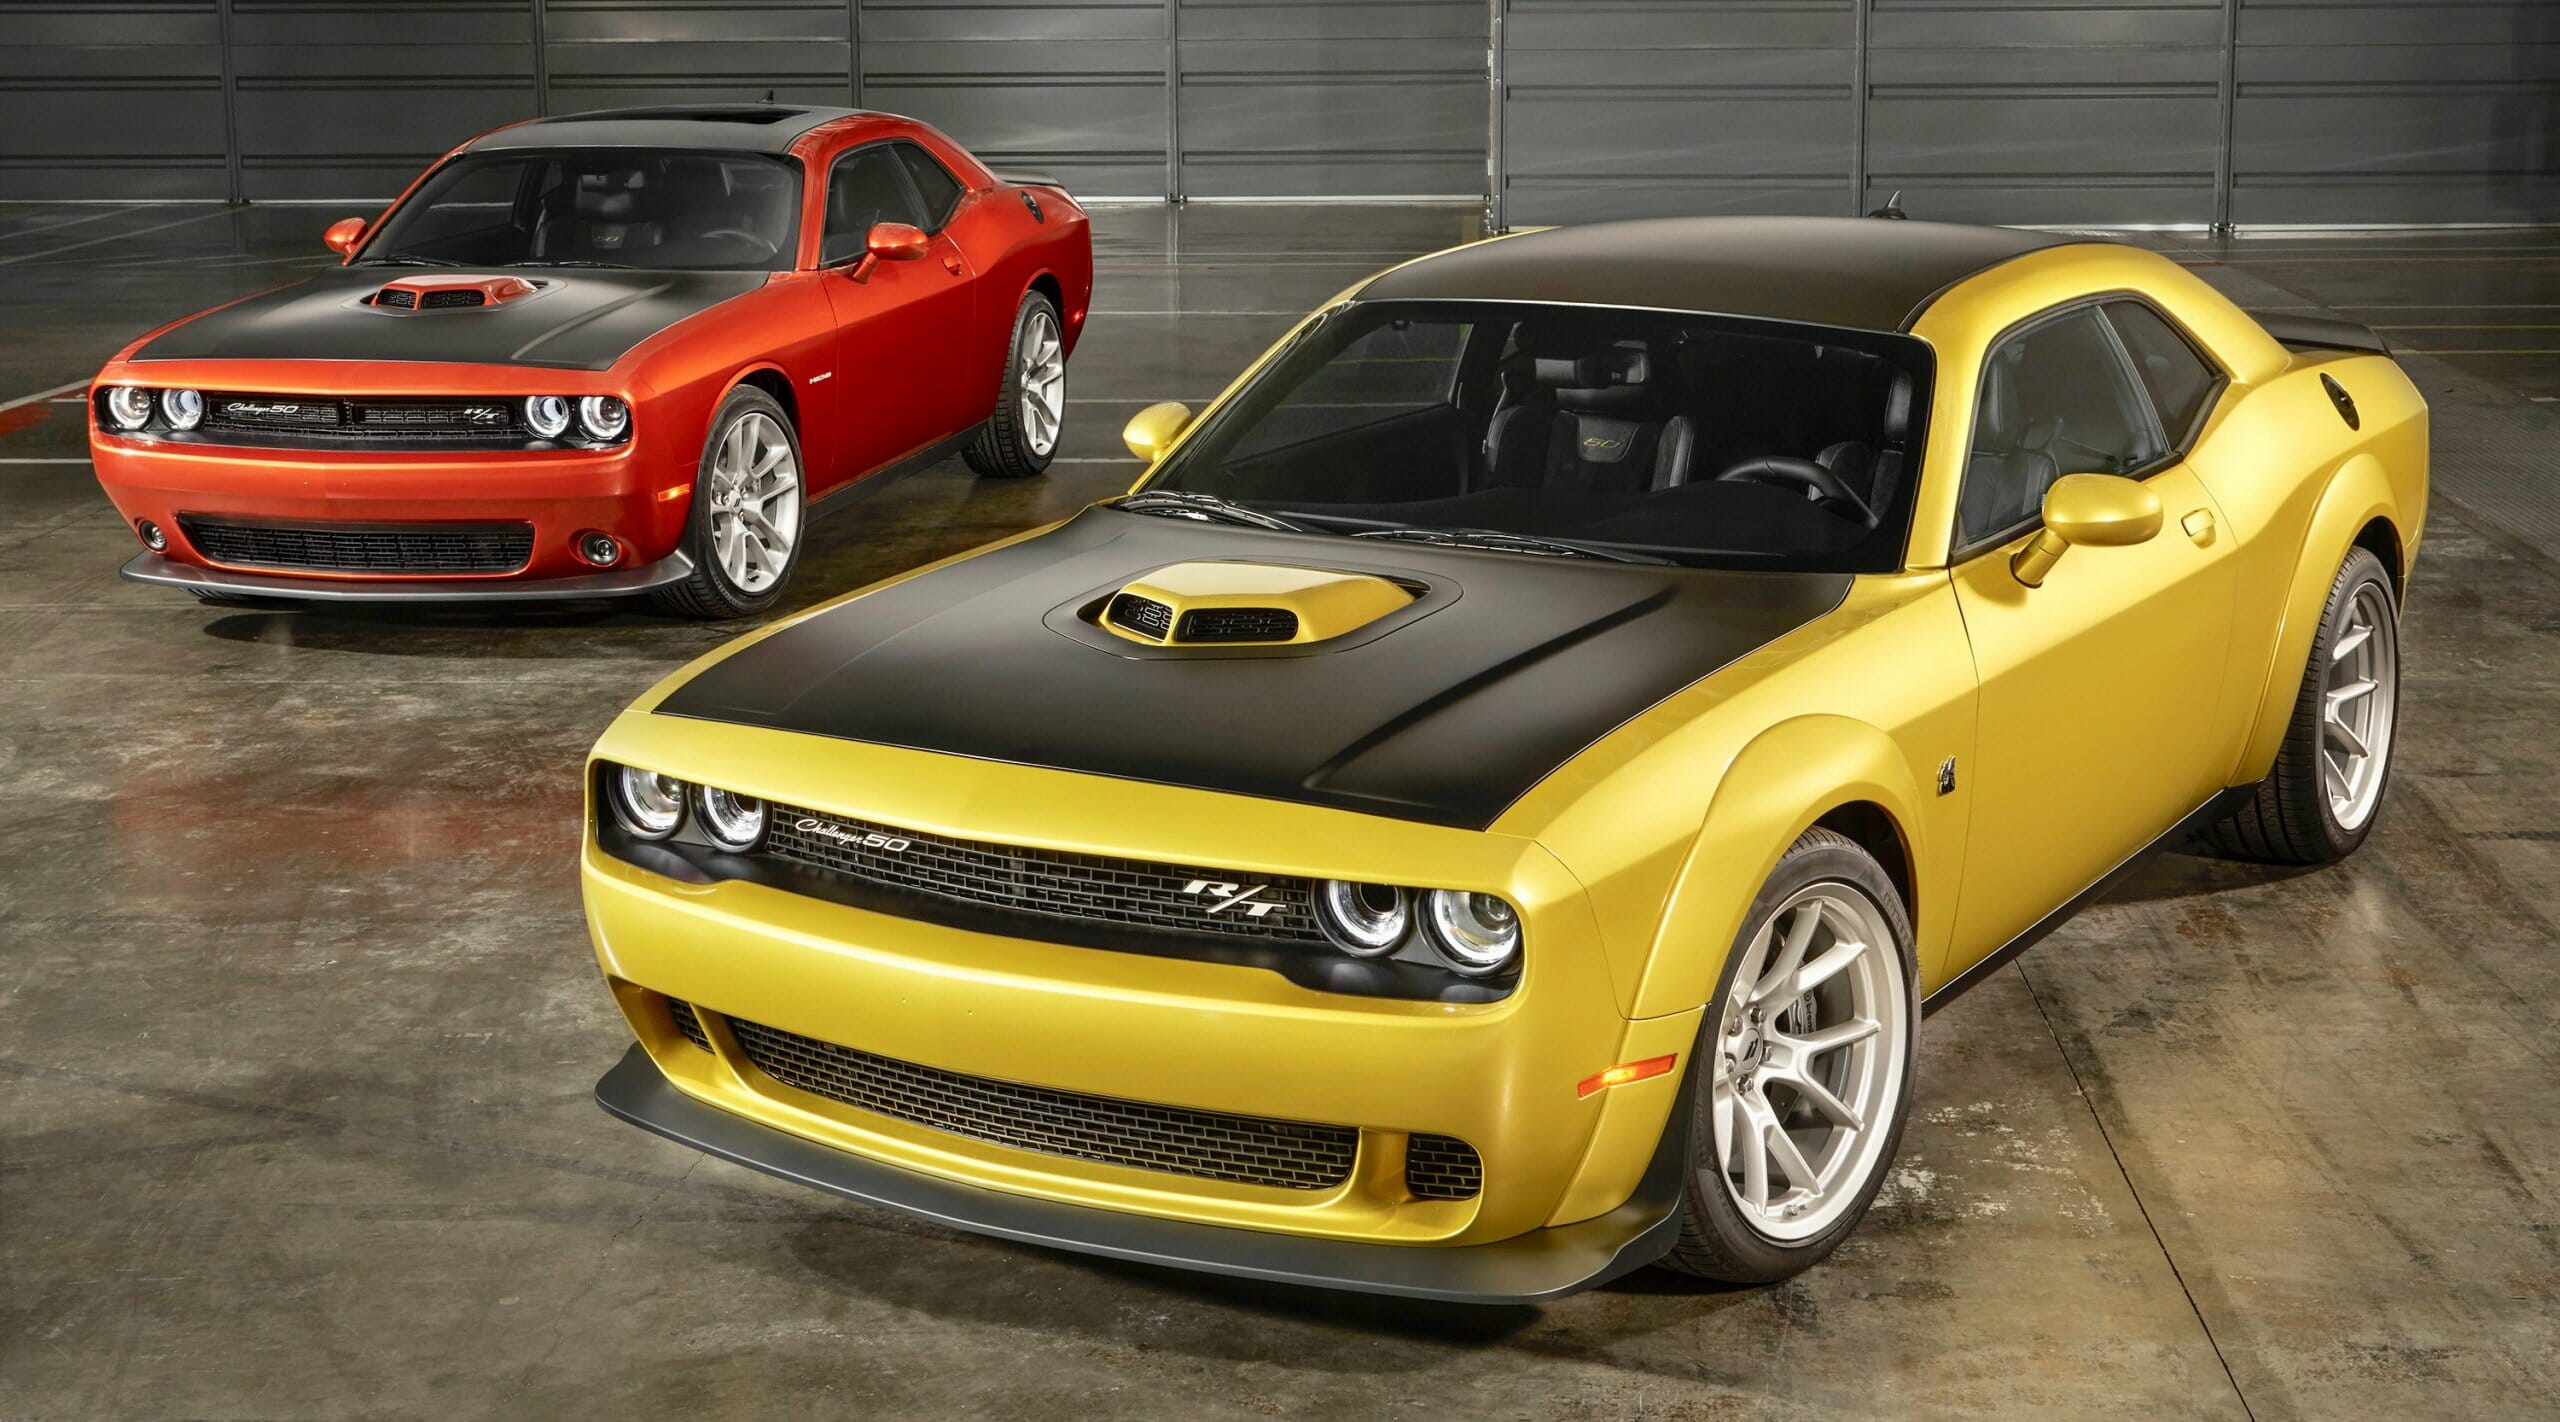 Dodge Challenger, Dodge celebrates Challenger’s 50th birthday with ‘Gold School’ option, ClassicCars.com Journal